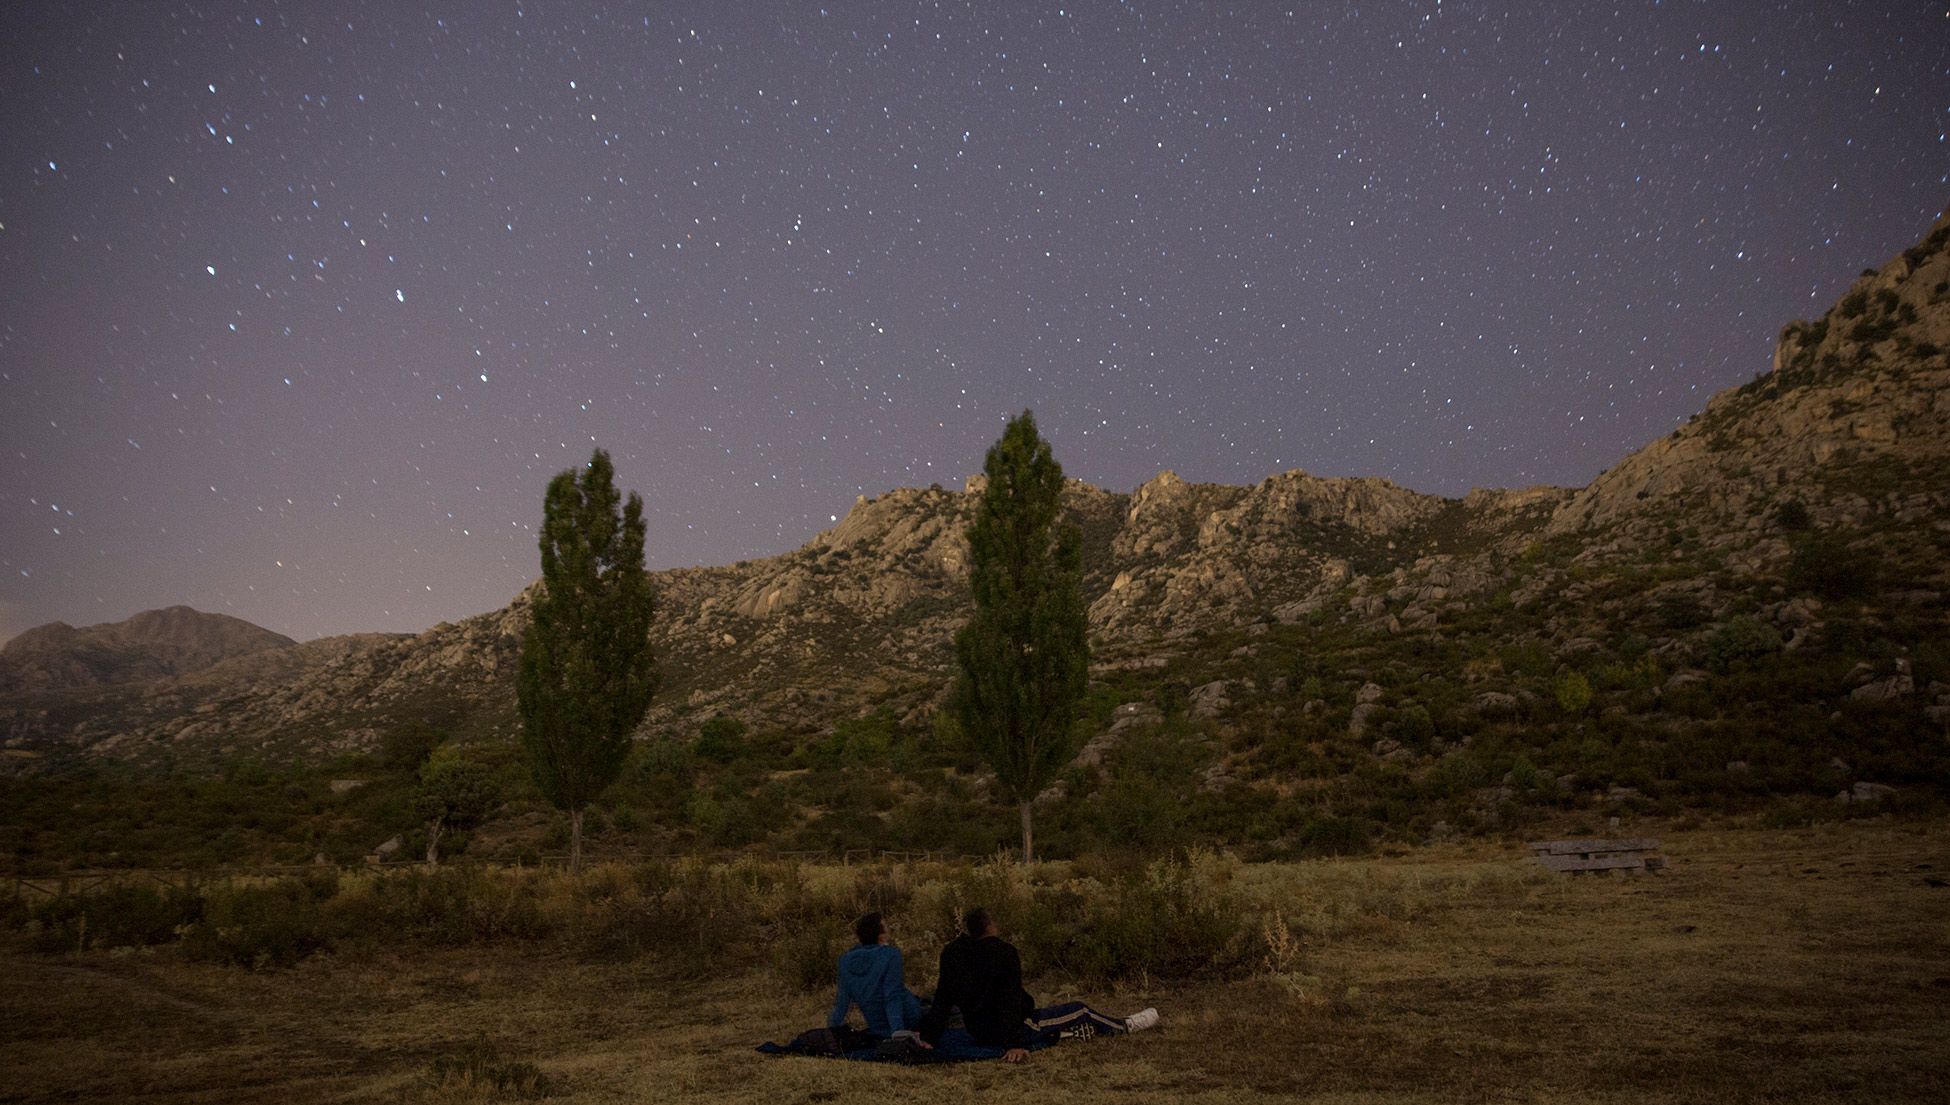 Why people across the world see constellations, not just stars | Psyche